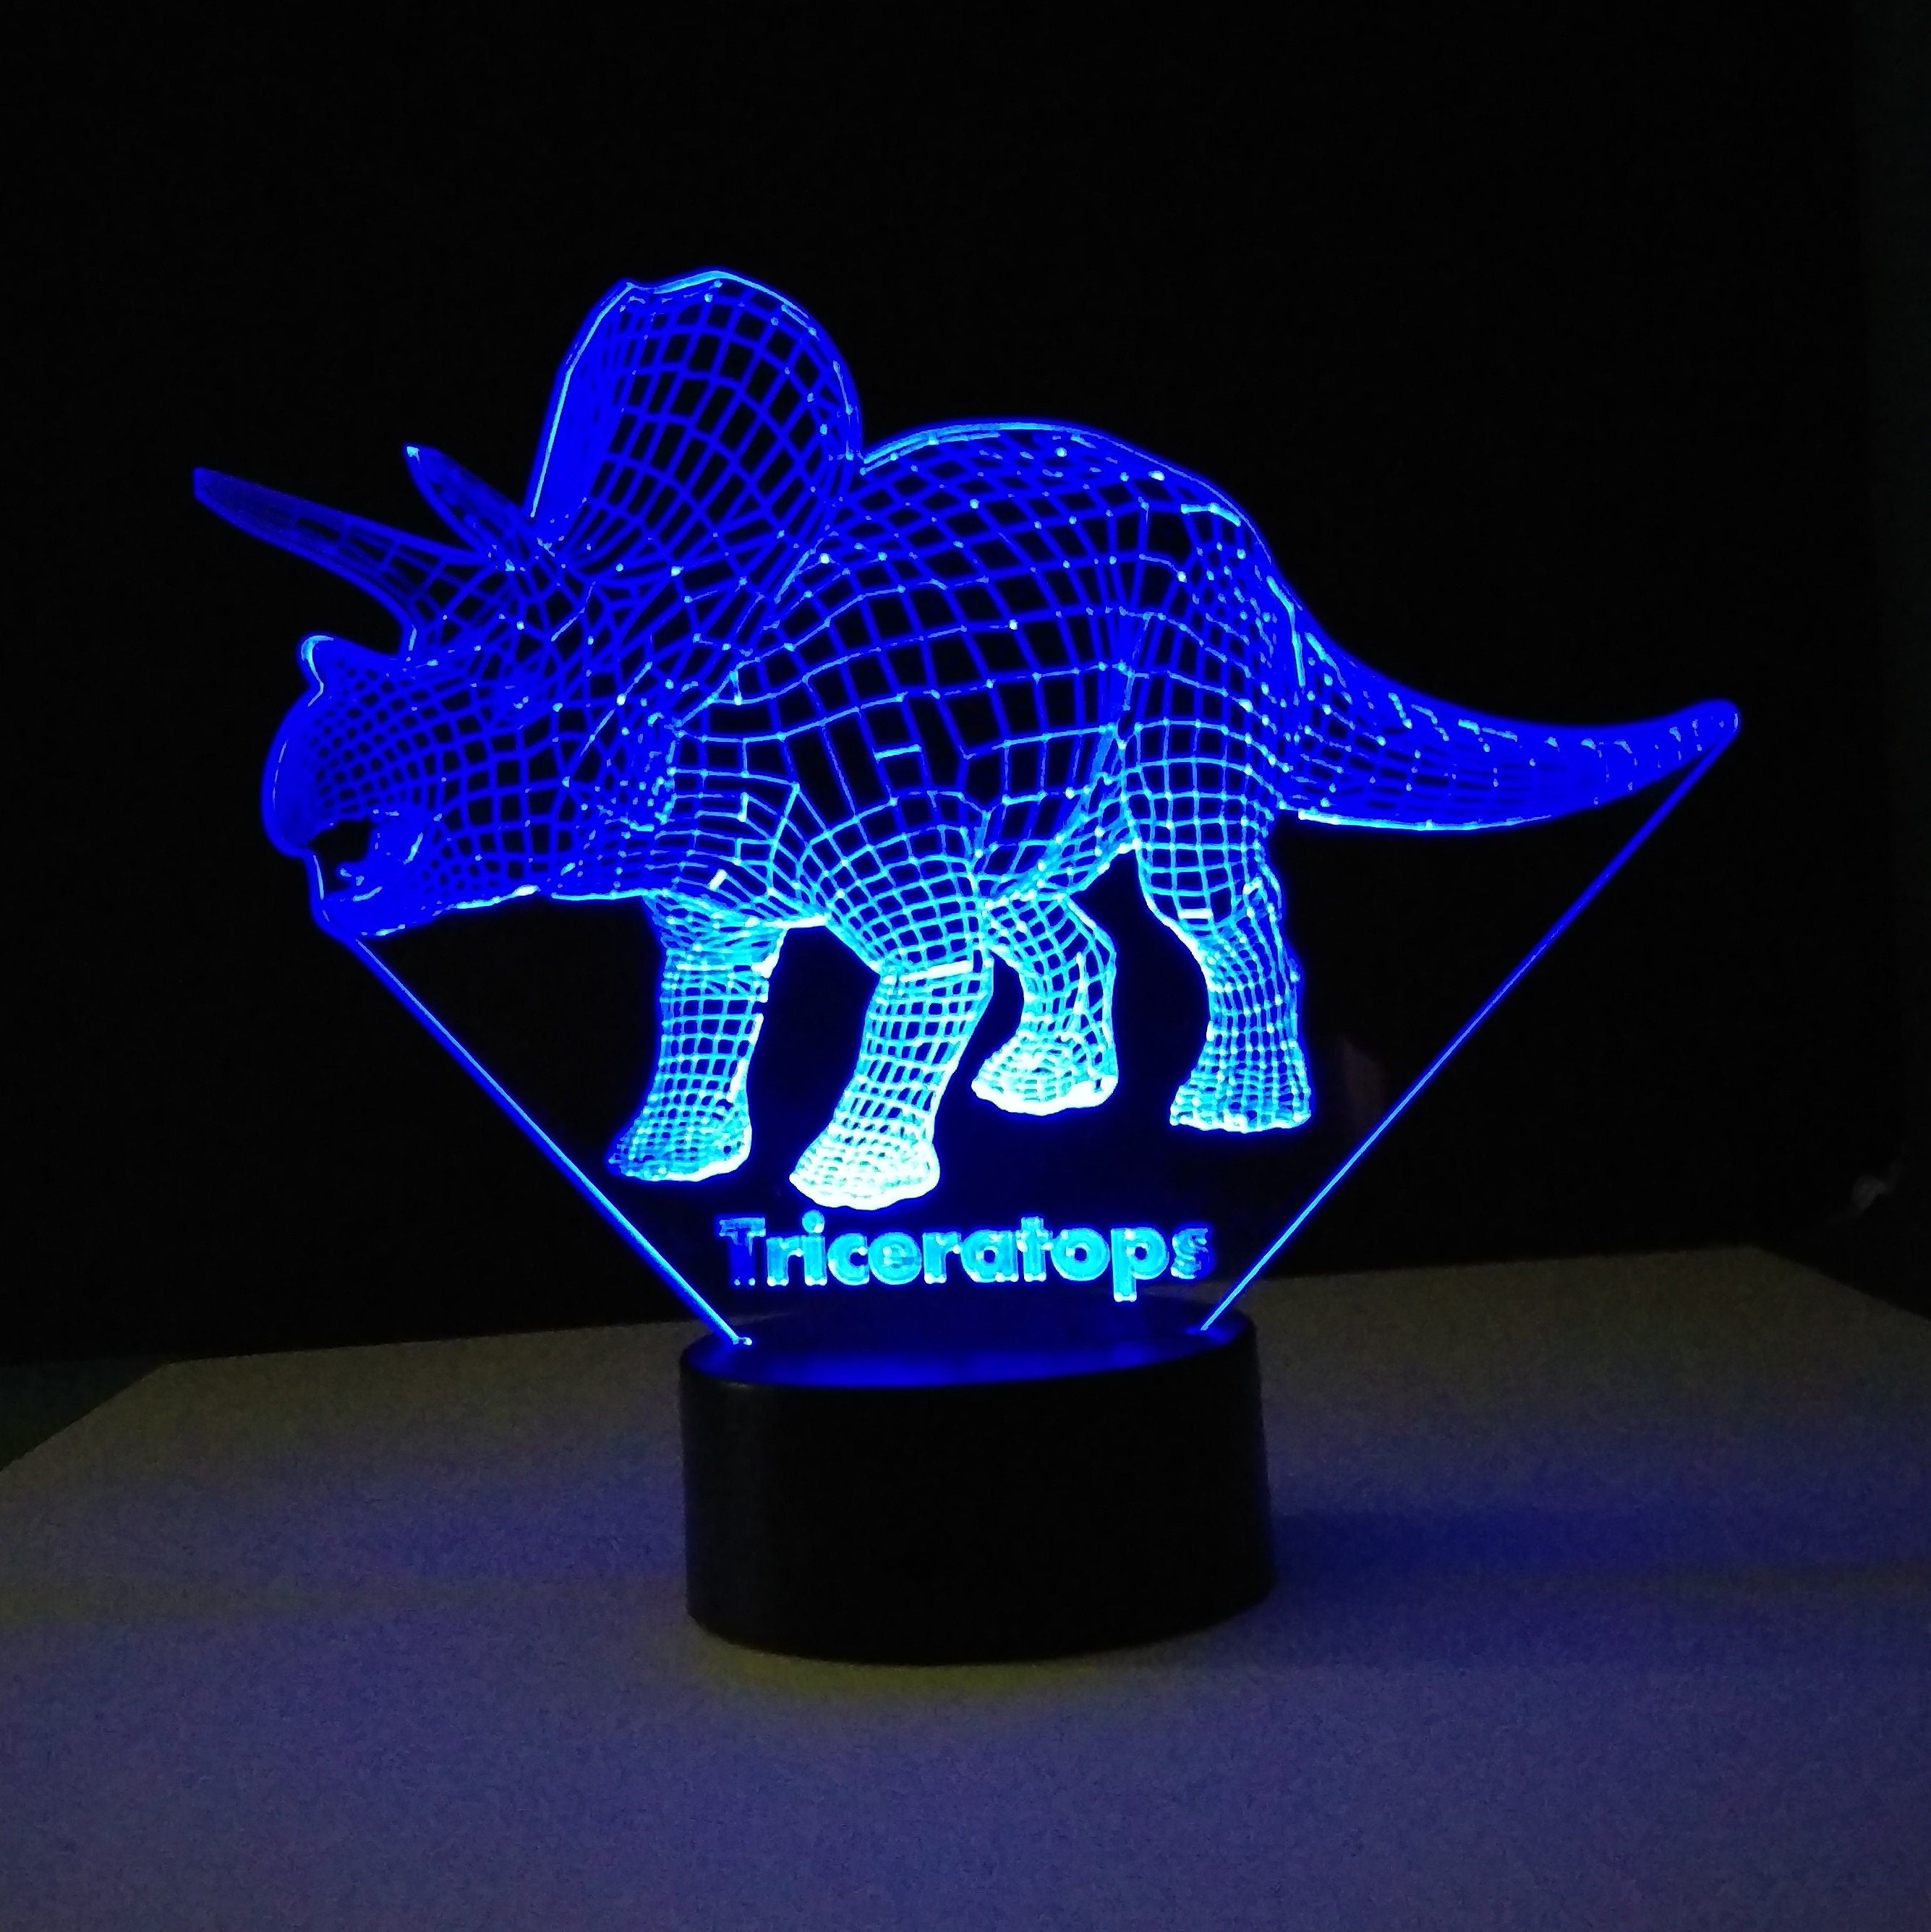 Awesome "Triceratops" 3D LED Lamp (1235) - FREE SHIPPING!